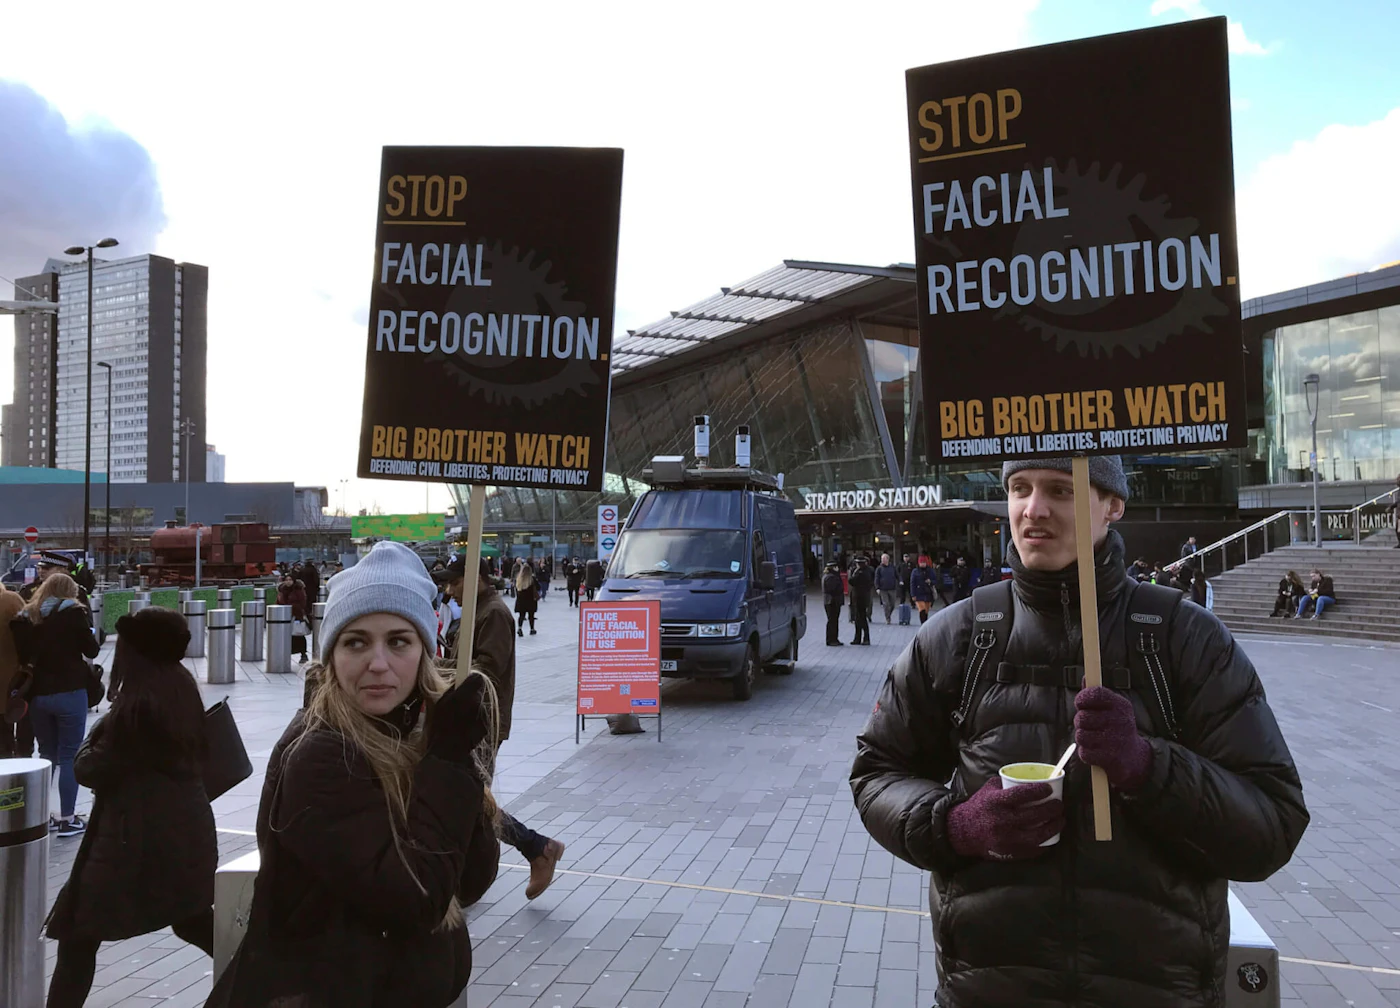 In this Feb. 11, 2020, file photo, Silkie Carlo, left, demonstrates in front of a mobile police facial recognition facility outside a shopping centre in London. A Black man who says he was unjustly arrested because facial recognition technology mistakenly identified him as a suspected shoplifter is calling for a public apology from Detroit police. And for the department to abandon its use of the controversial technology. (AP Photo/Kelvin Chan, File)